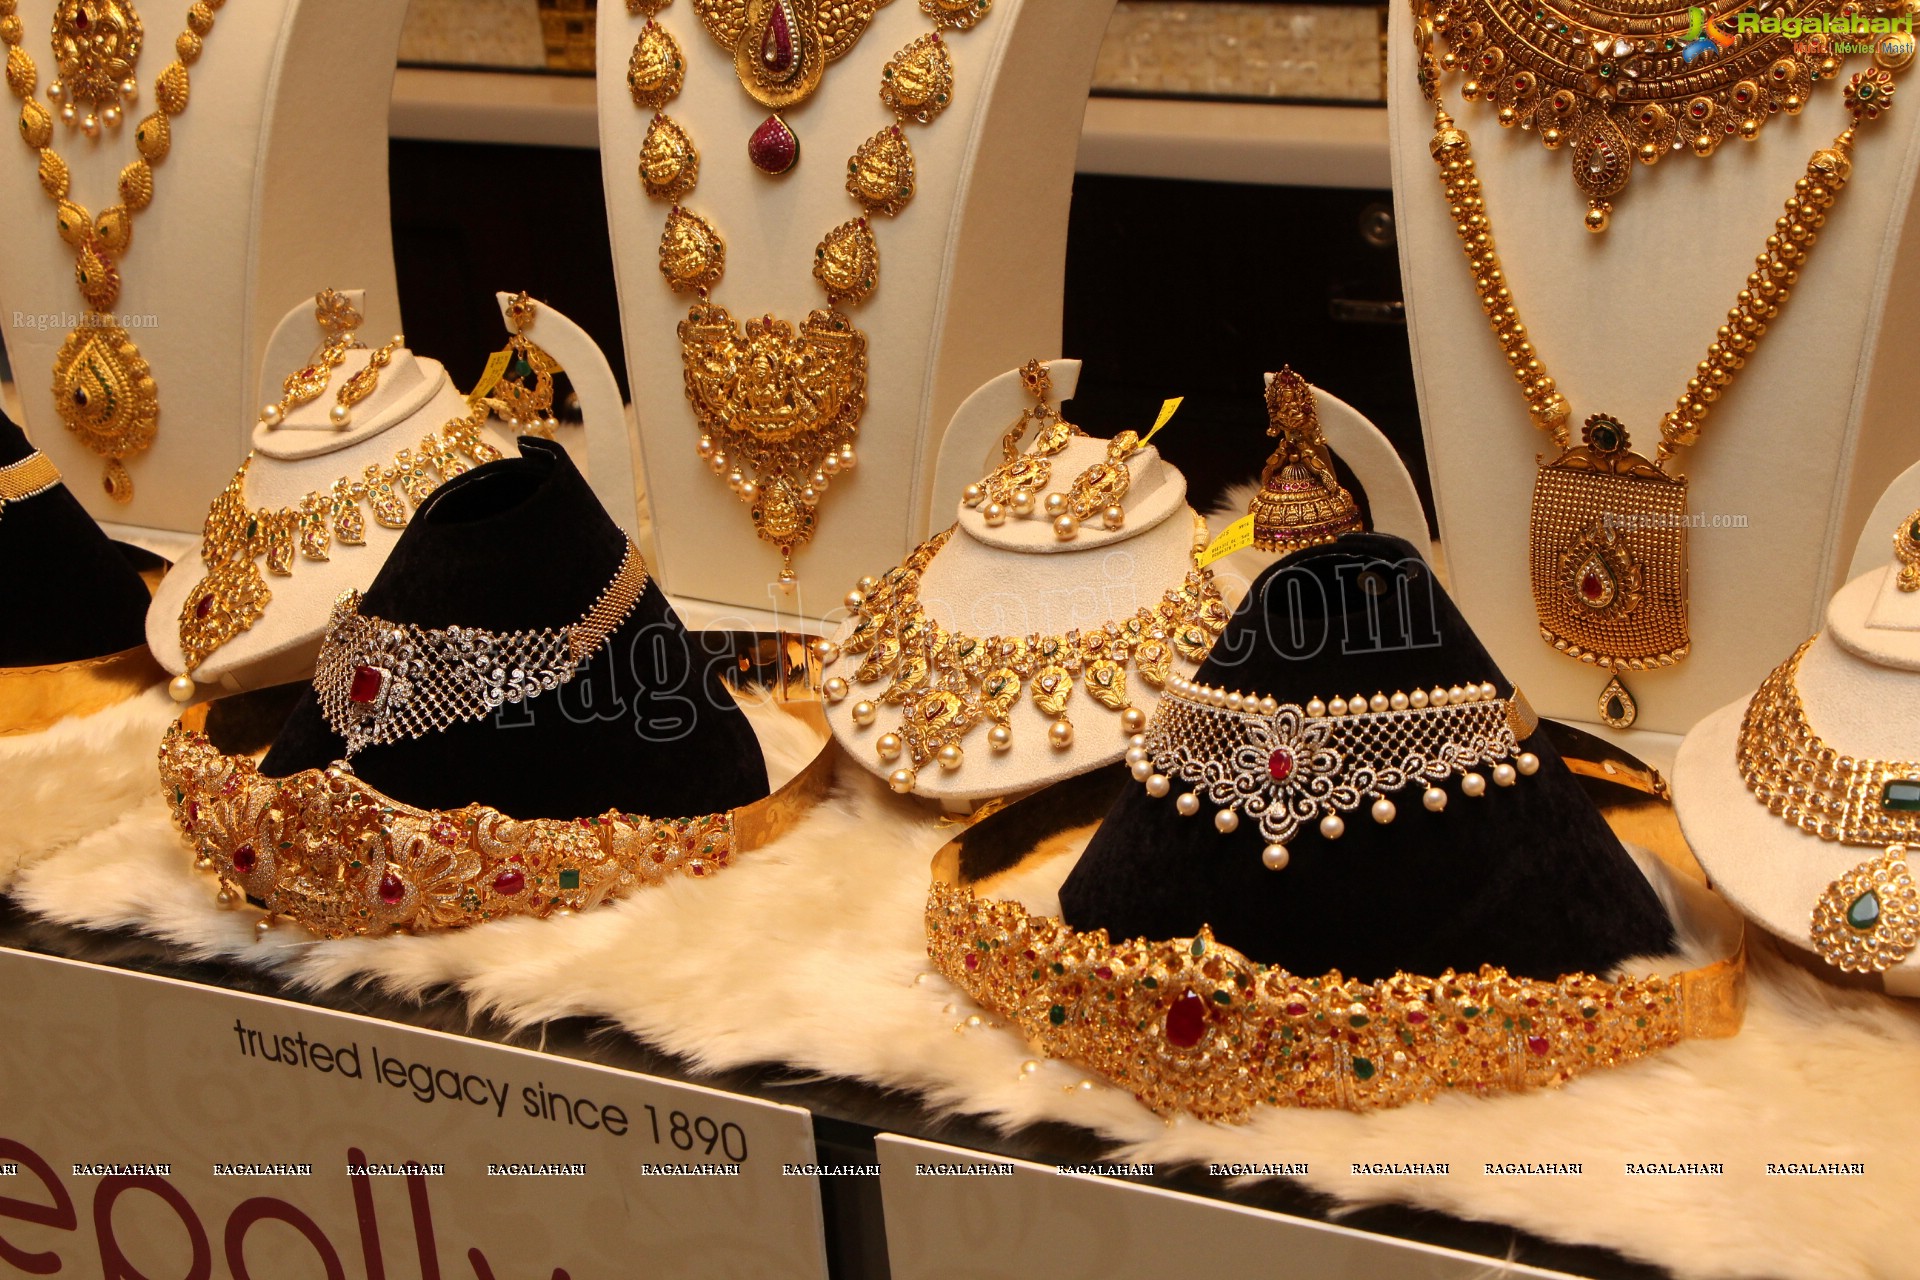 Manepally Dhanteras Jewellery Collection 2014 (High Definition)